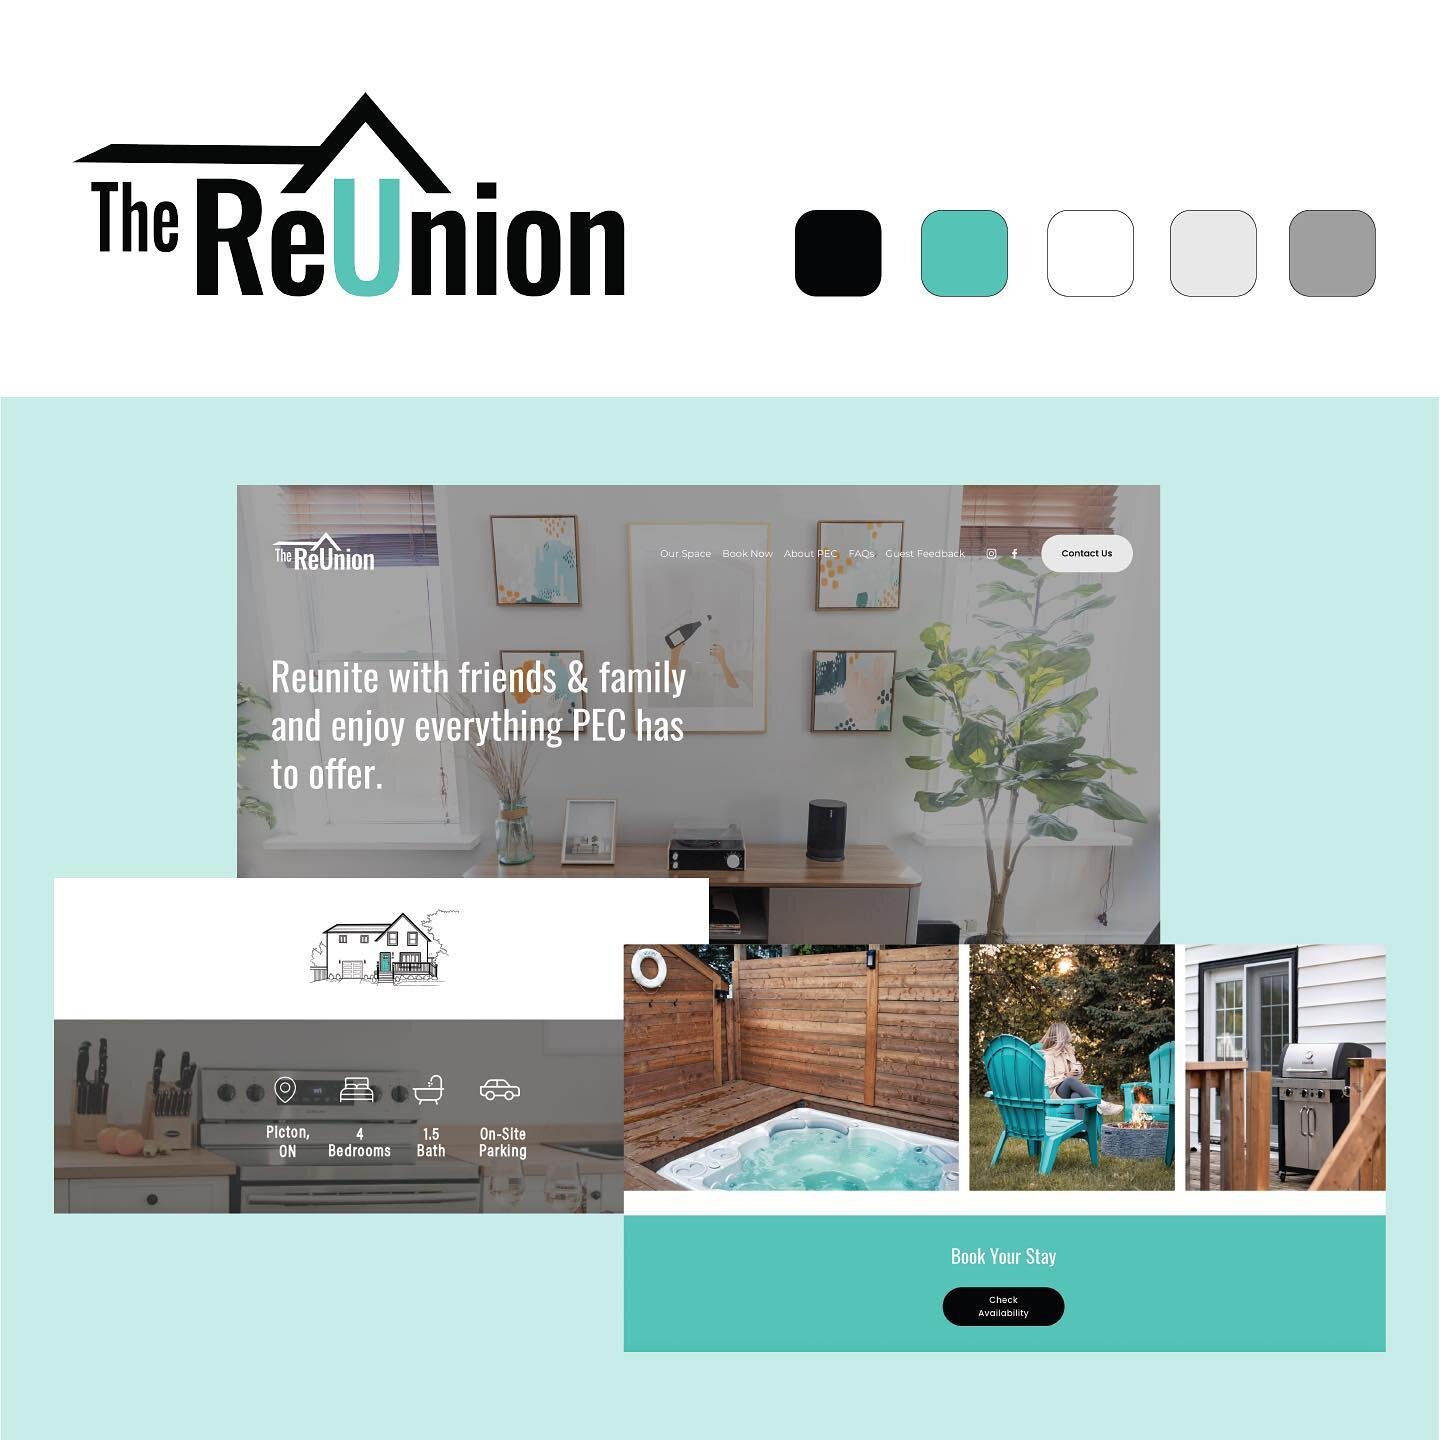 A brand new website for The ReUnion PEC, an ultra cool vacation rental in Picton, ON. ⁣
⁣
The goal was to combine the vibe of the space with an interactive and user friendly design. Now the guest experience begins before they even check in. 🔑